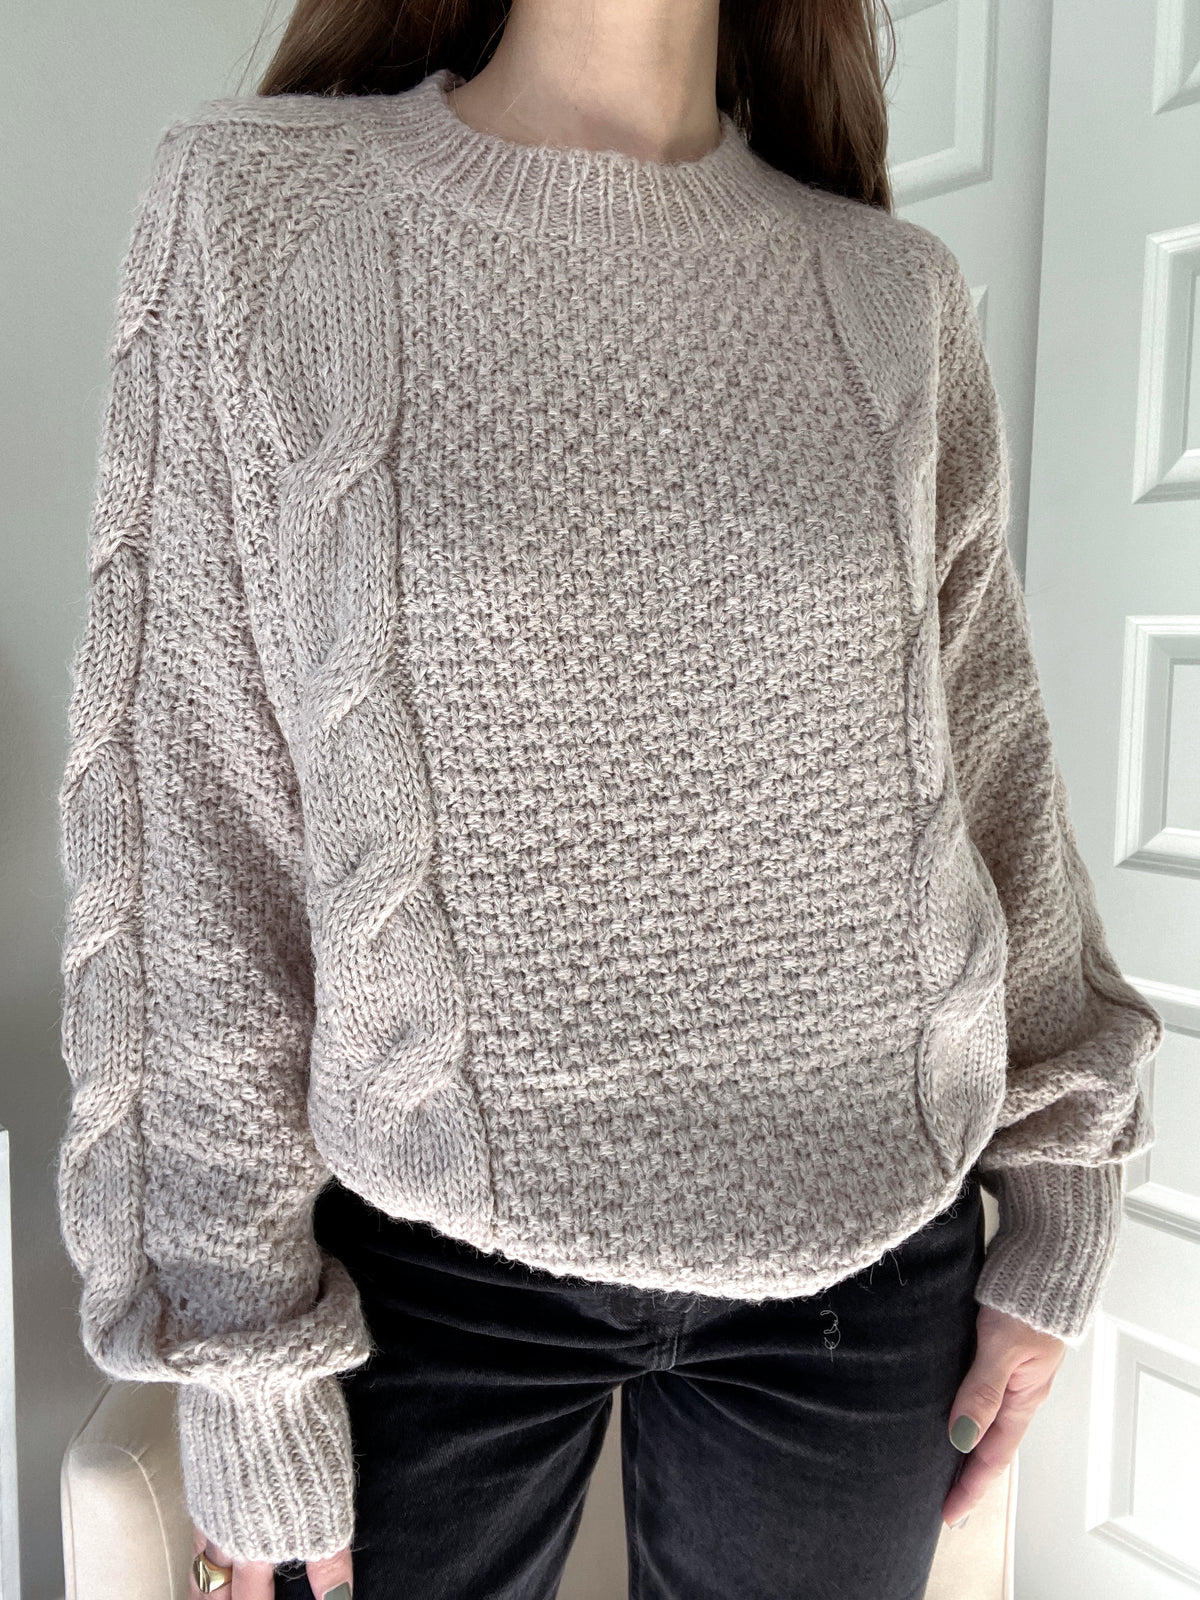 Soho Wool Blend Cable Knit Pullover Sweater (Almond)